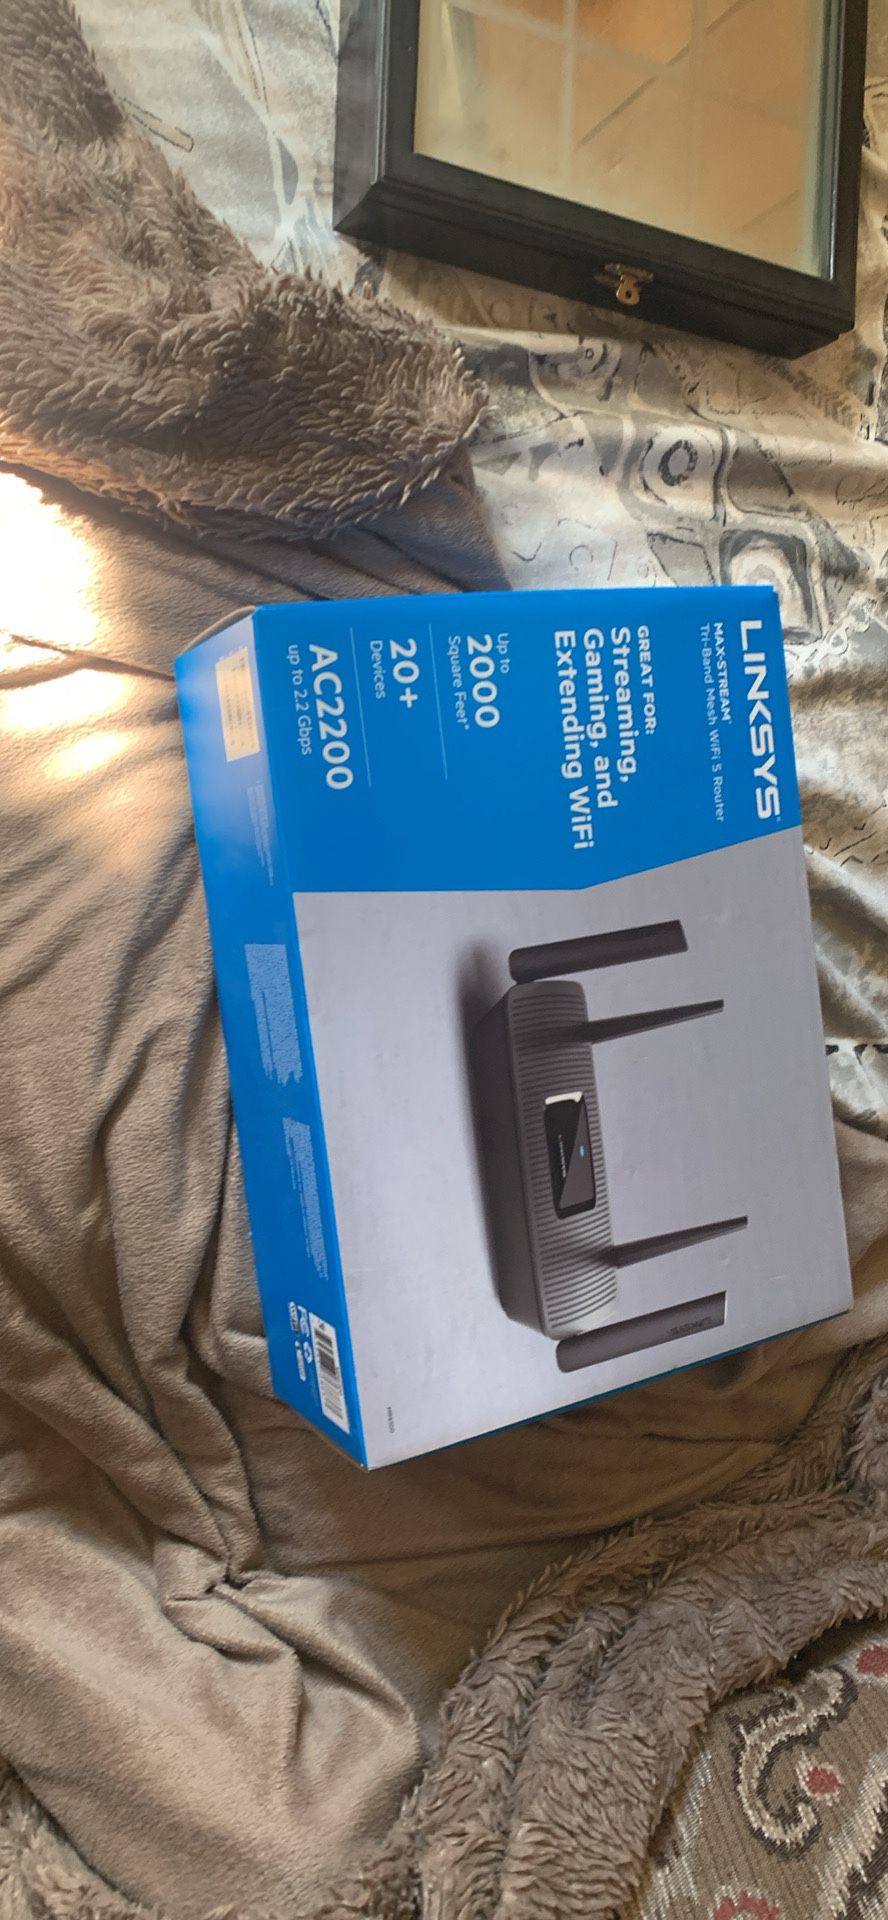 Wifi Router Brand New In Box 